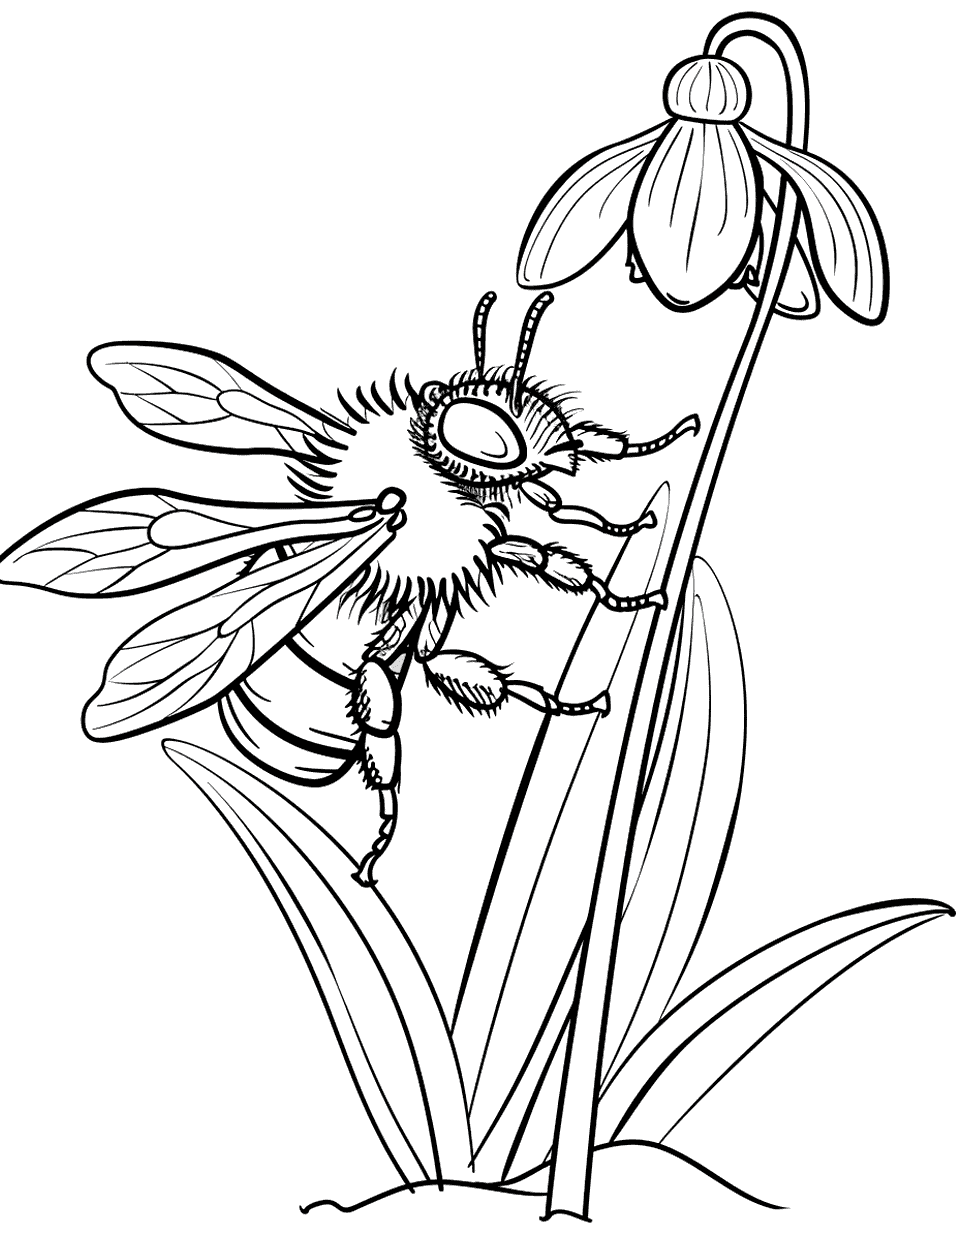 Winter Bee on Snowdrop Coloring Page - A bee braving the cold to visit a snowdrop flower, a sign of spring.